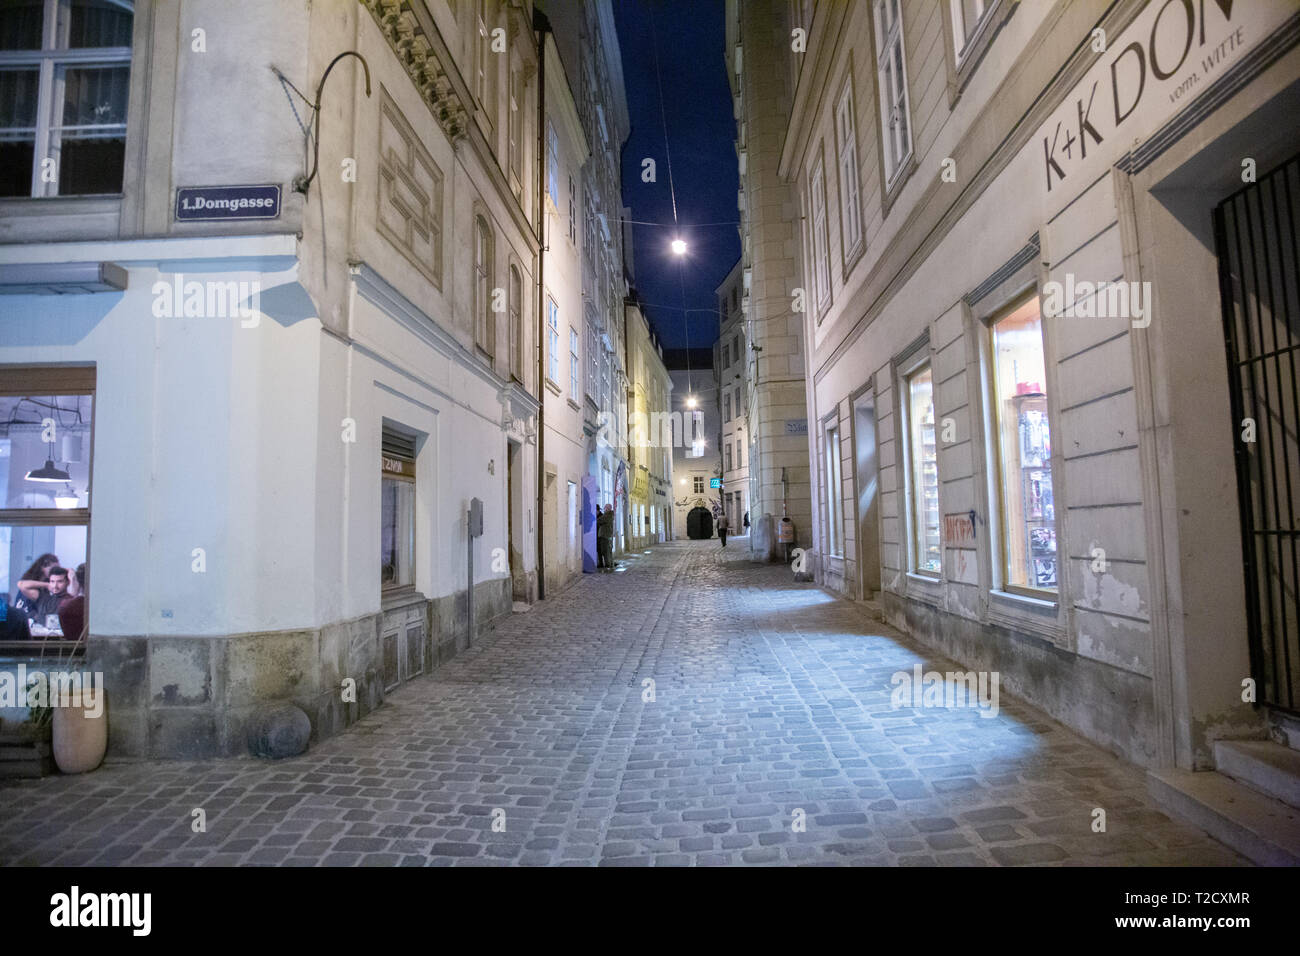 Domgasse, Vienna at Night. View from the West to the East end of the street, including a street sign and the Mozart House with people outside Stock Photo